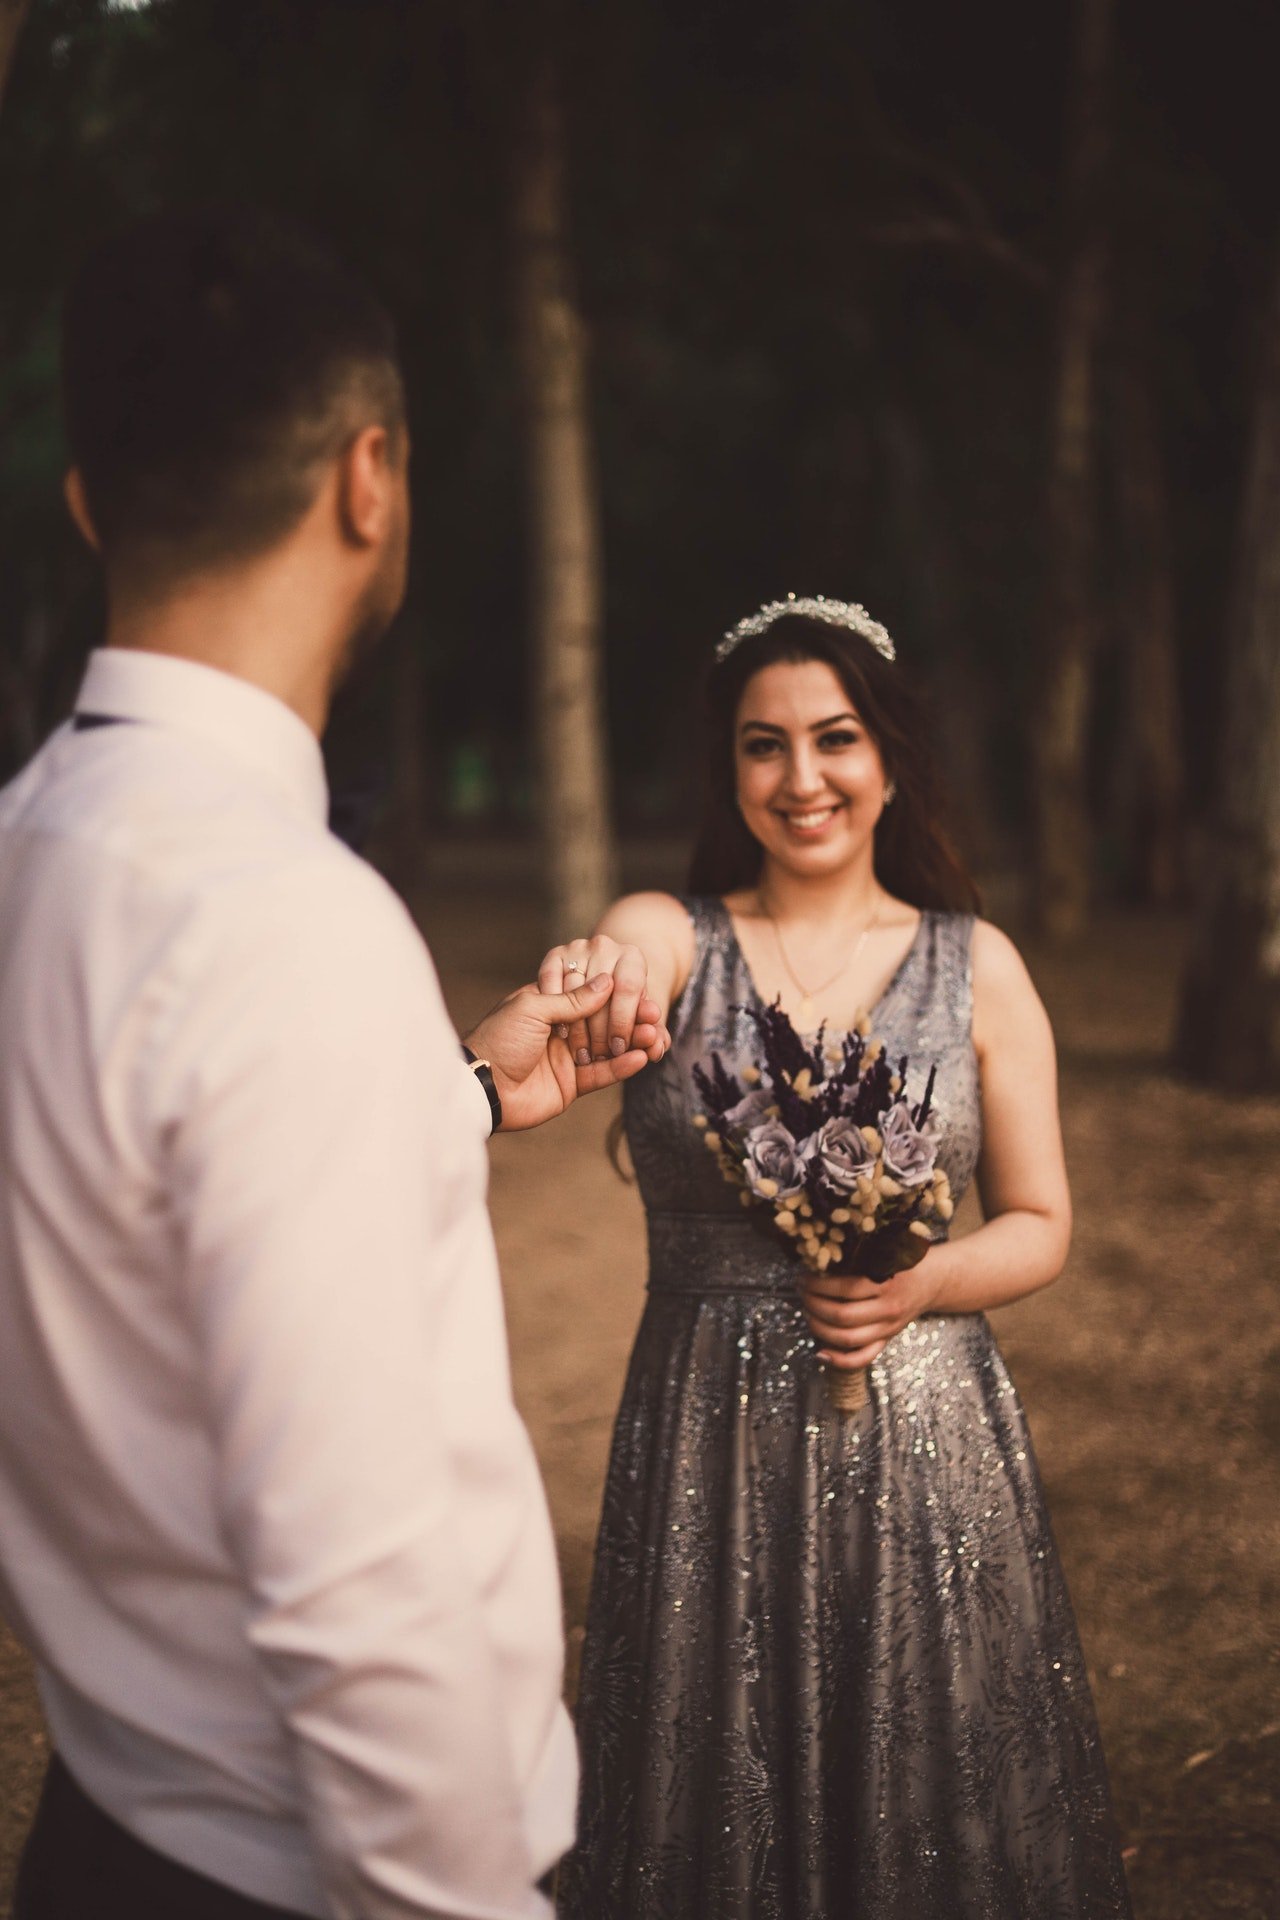 They got married at the same spot where Eric had found her. | Source: Pexels